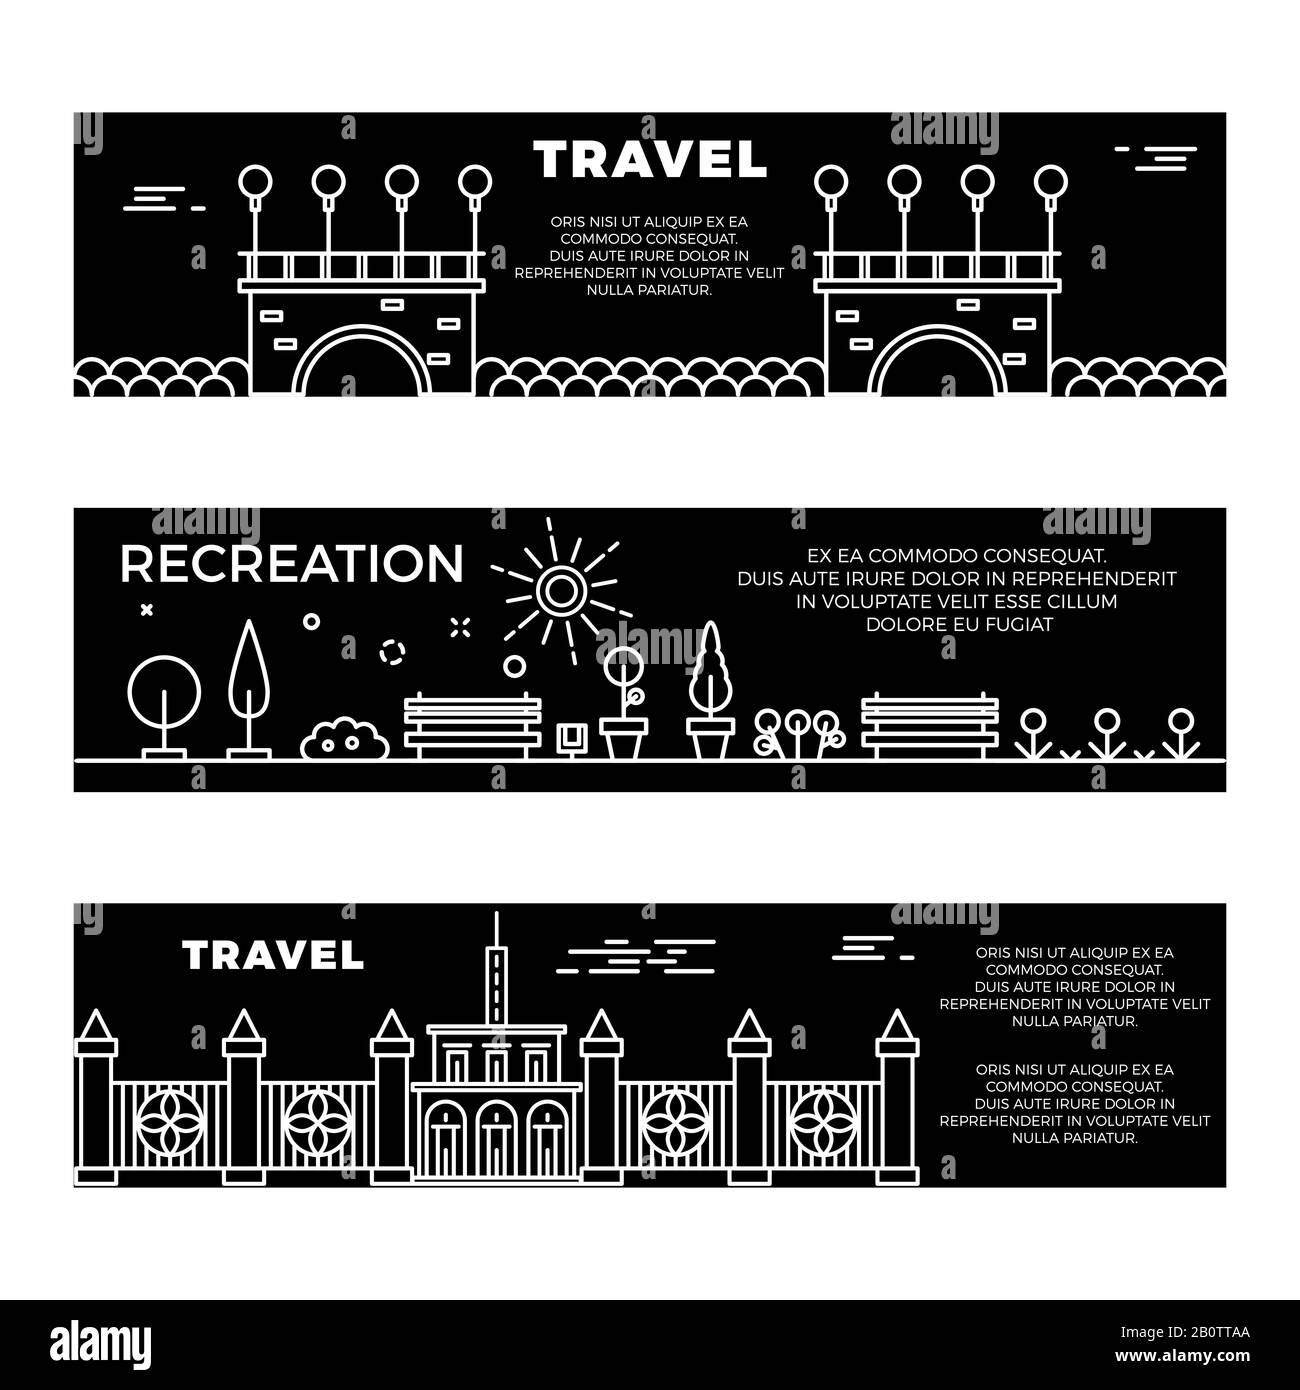 Travel and recreation flat banners template with line art landscapes. Collection of posters illustration Stock Vector